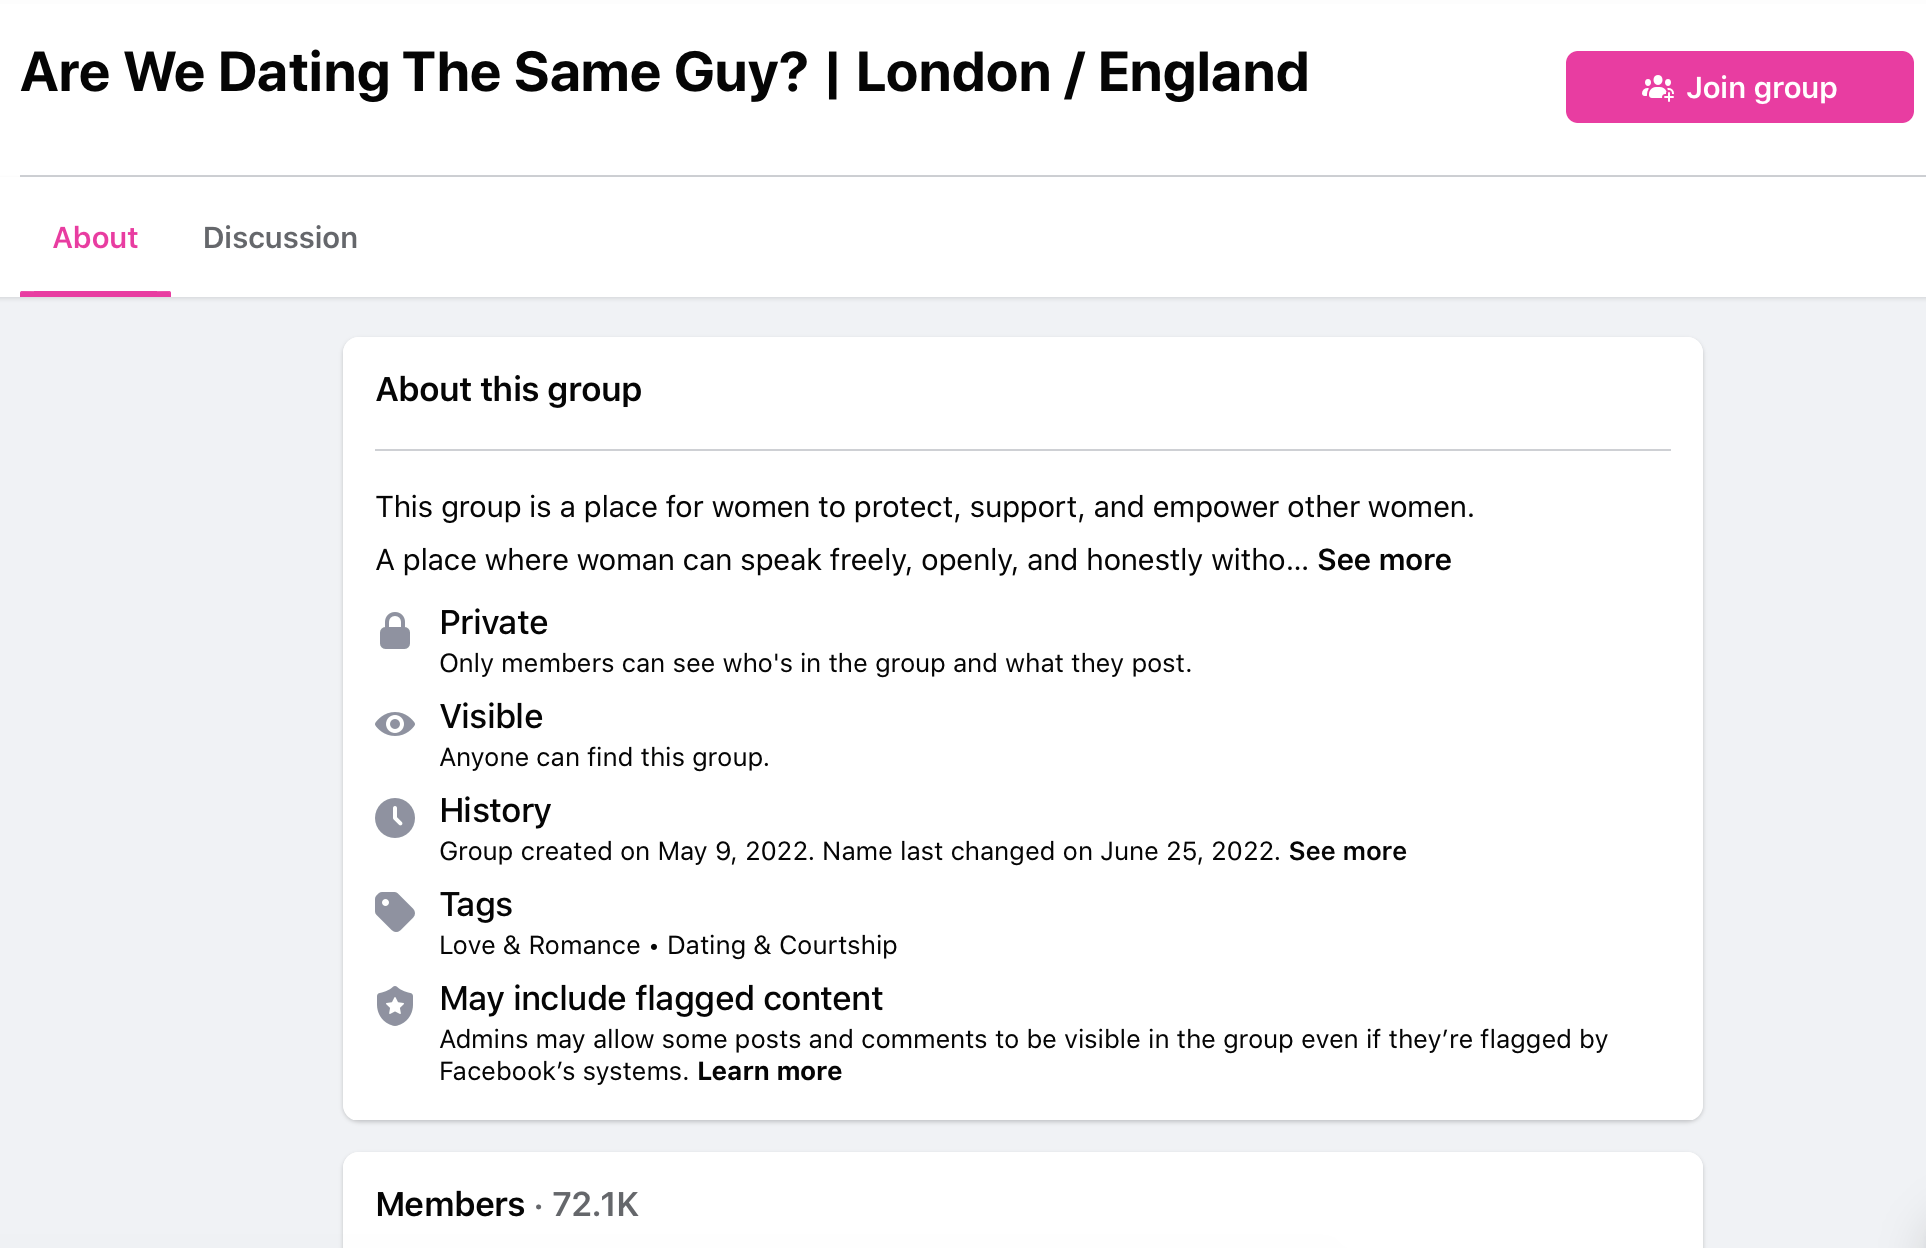 The UK hub of ‘Are We Dating the Same Guy?’ has more than 72,000 members at the time of writing